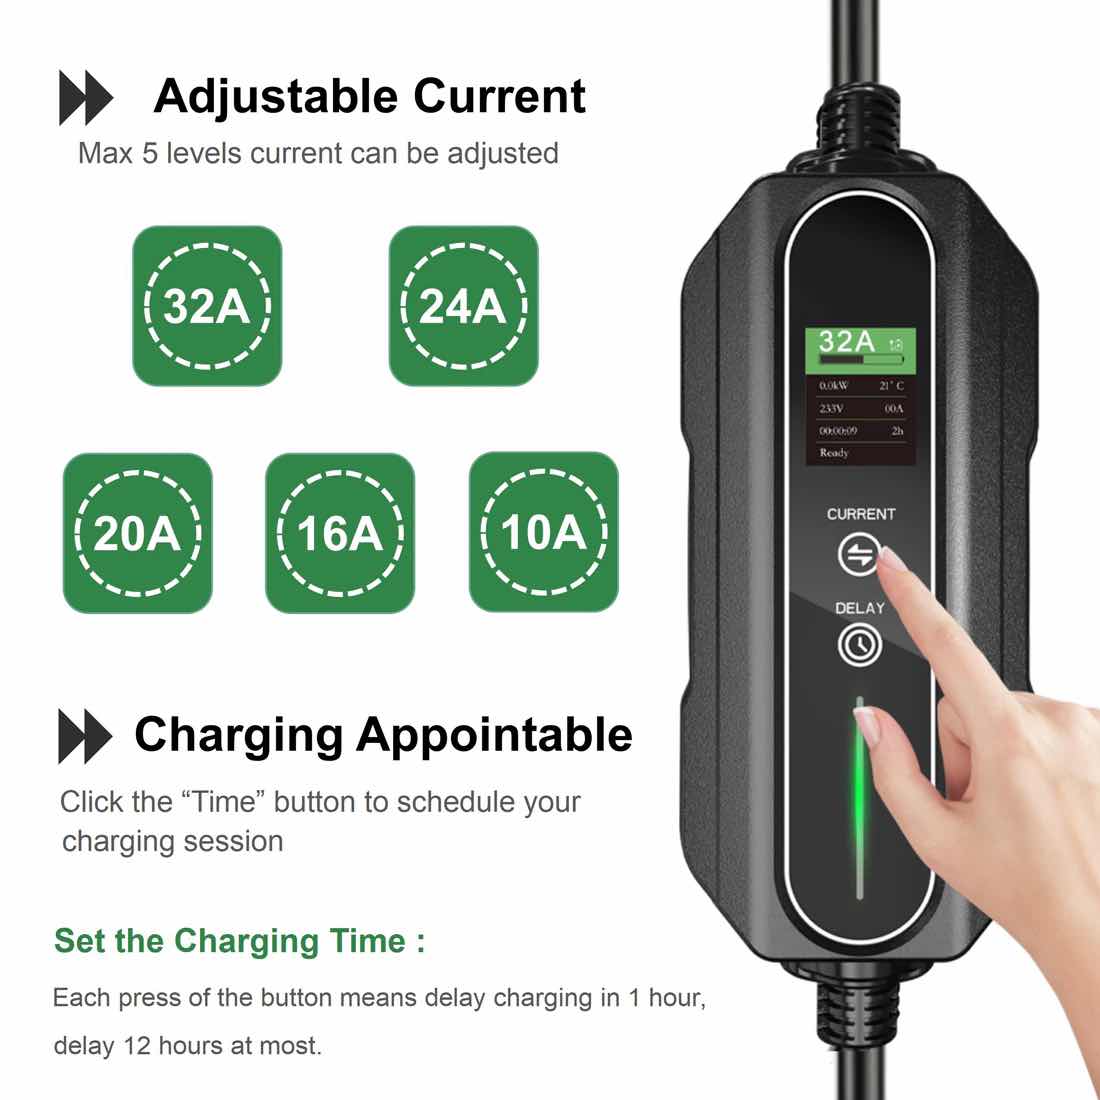 7kw <a href=https://fiverevse.com/Level-2--Portable--EV--Chargers.html target='_blank'>Portable EV Charger</a> for GBT electric cars